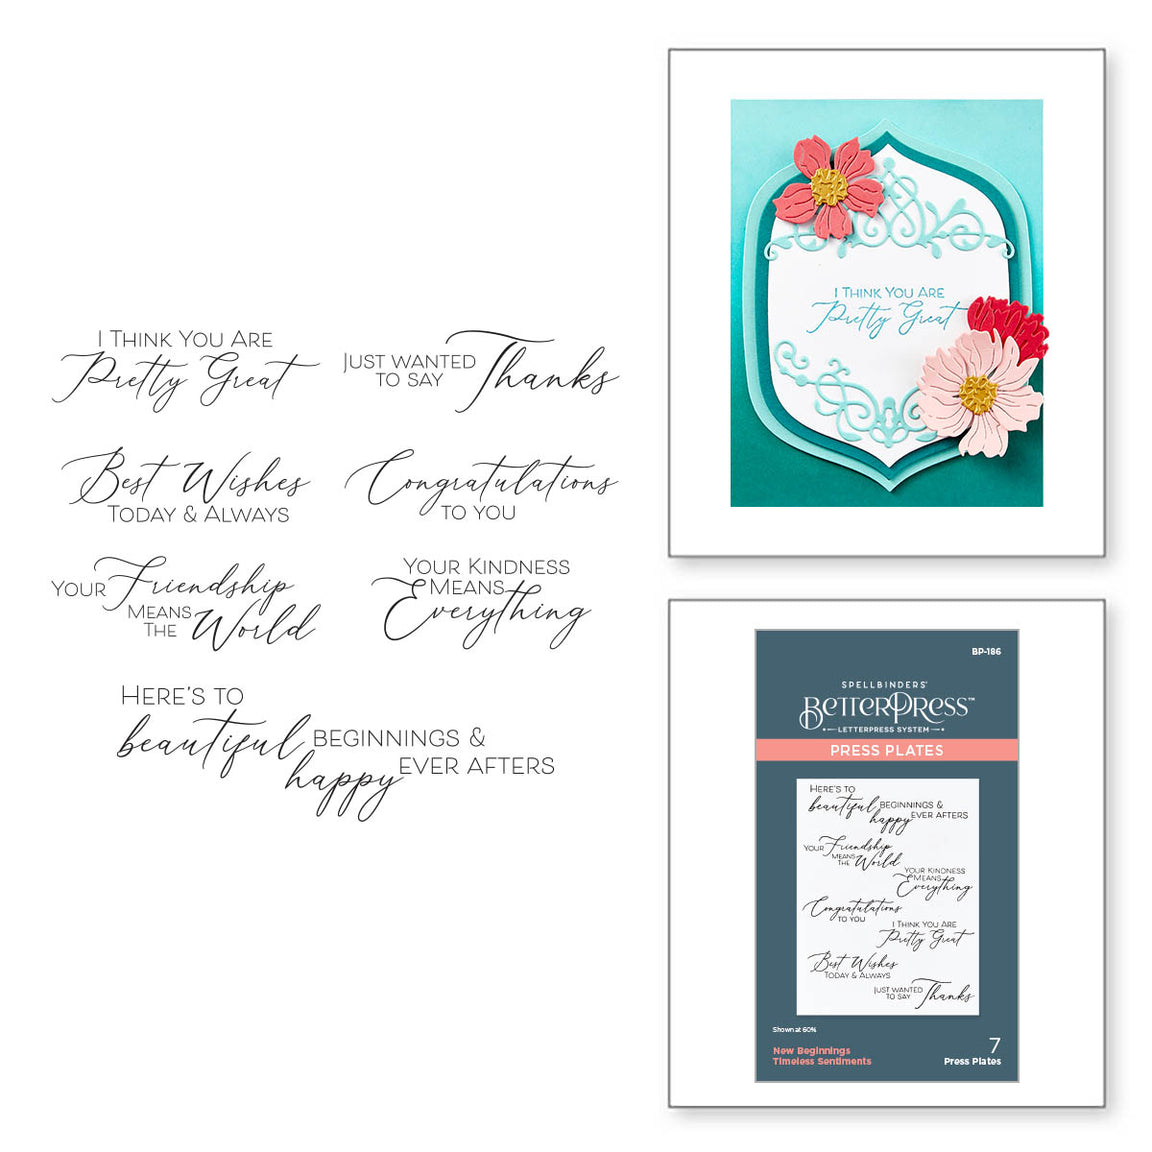 Spellbinders New Beginnings Timeless Sentiments Press Plates - Timeless Collection